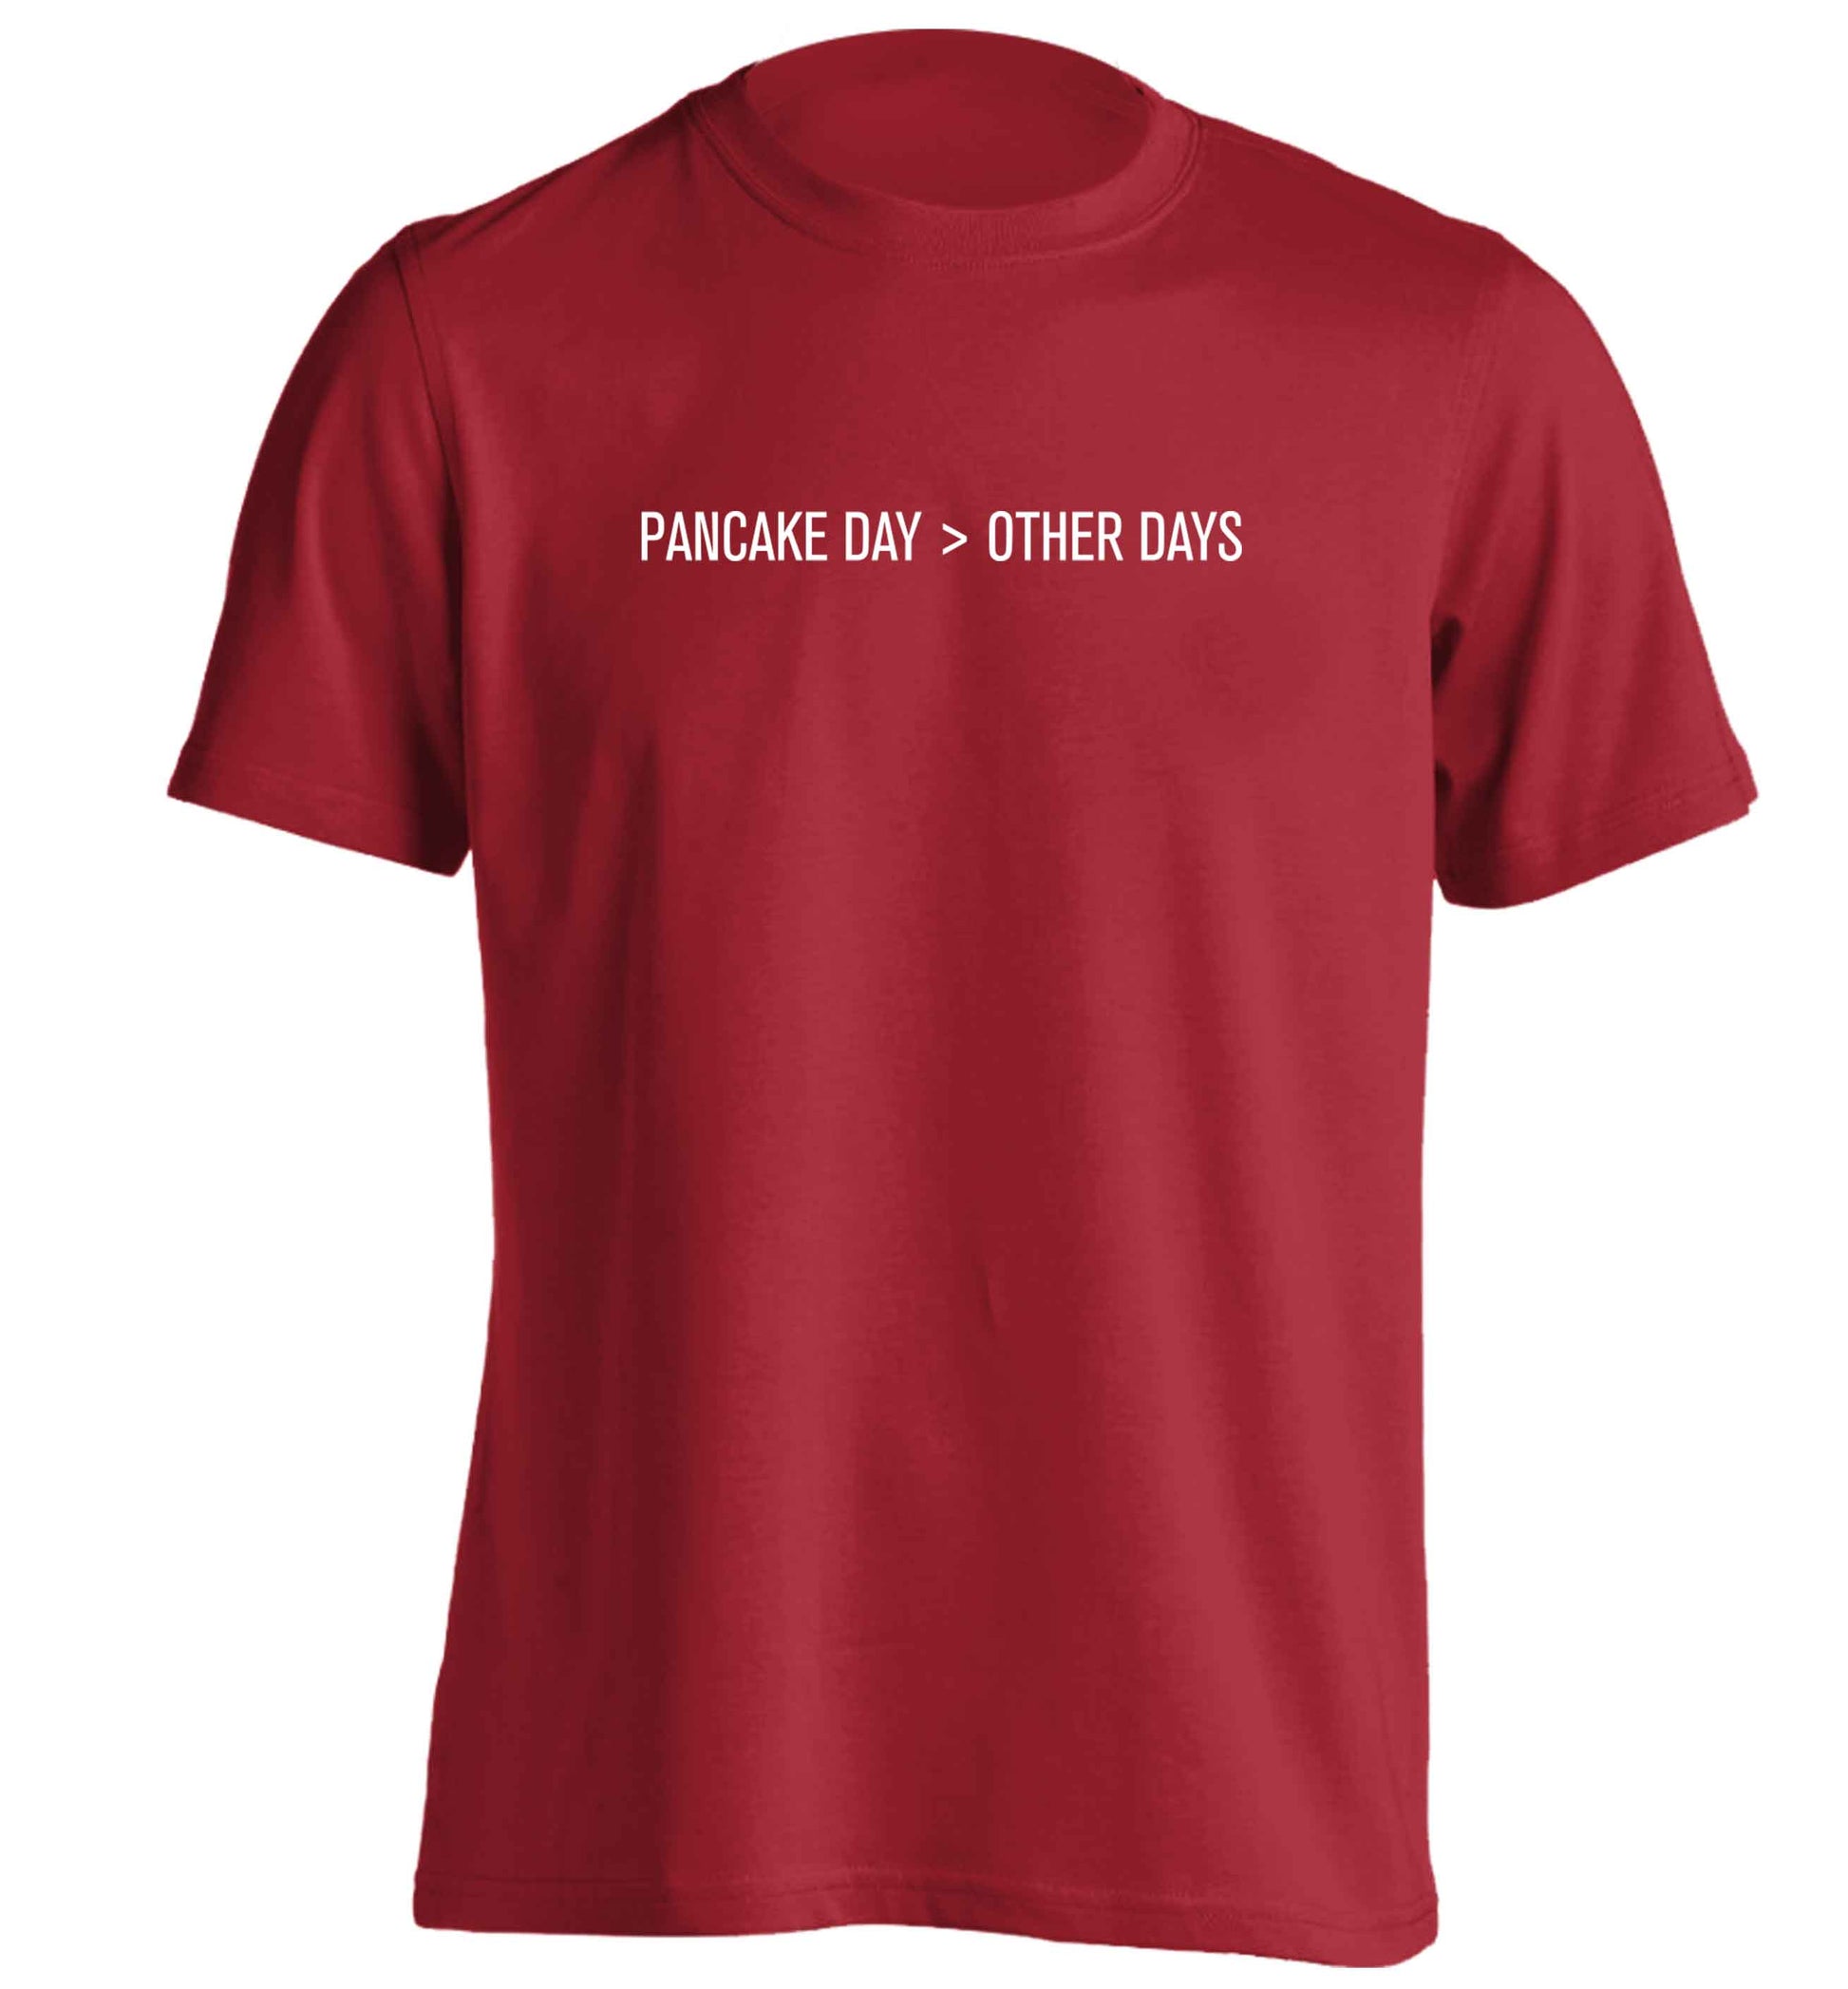 Pancake day > other days adults unisex red Tshirt 2XL